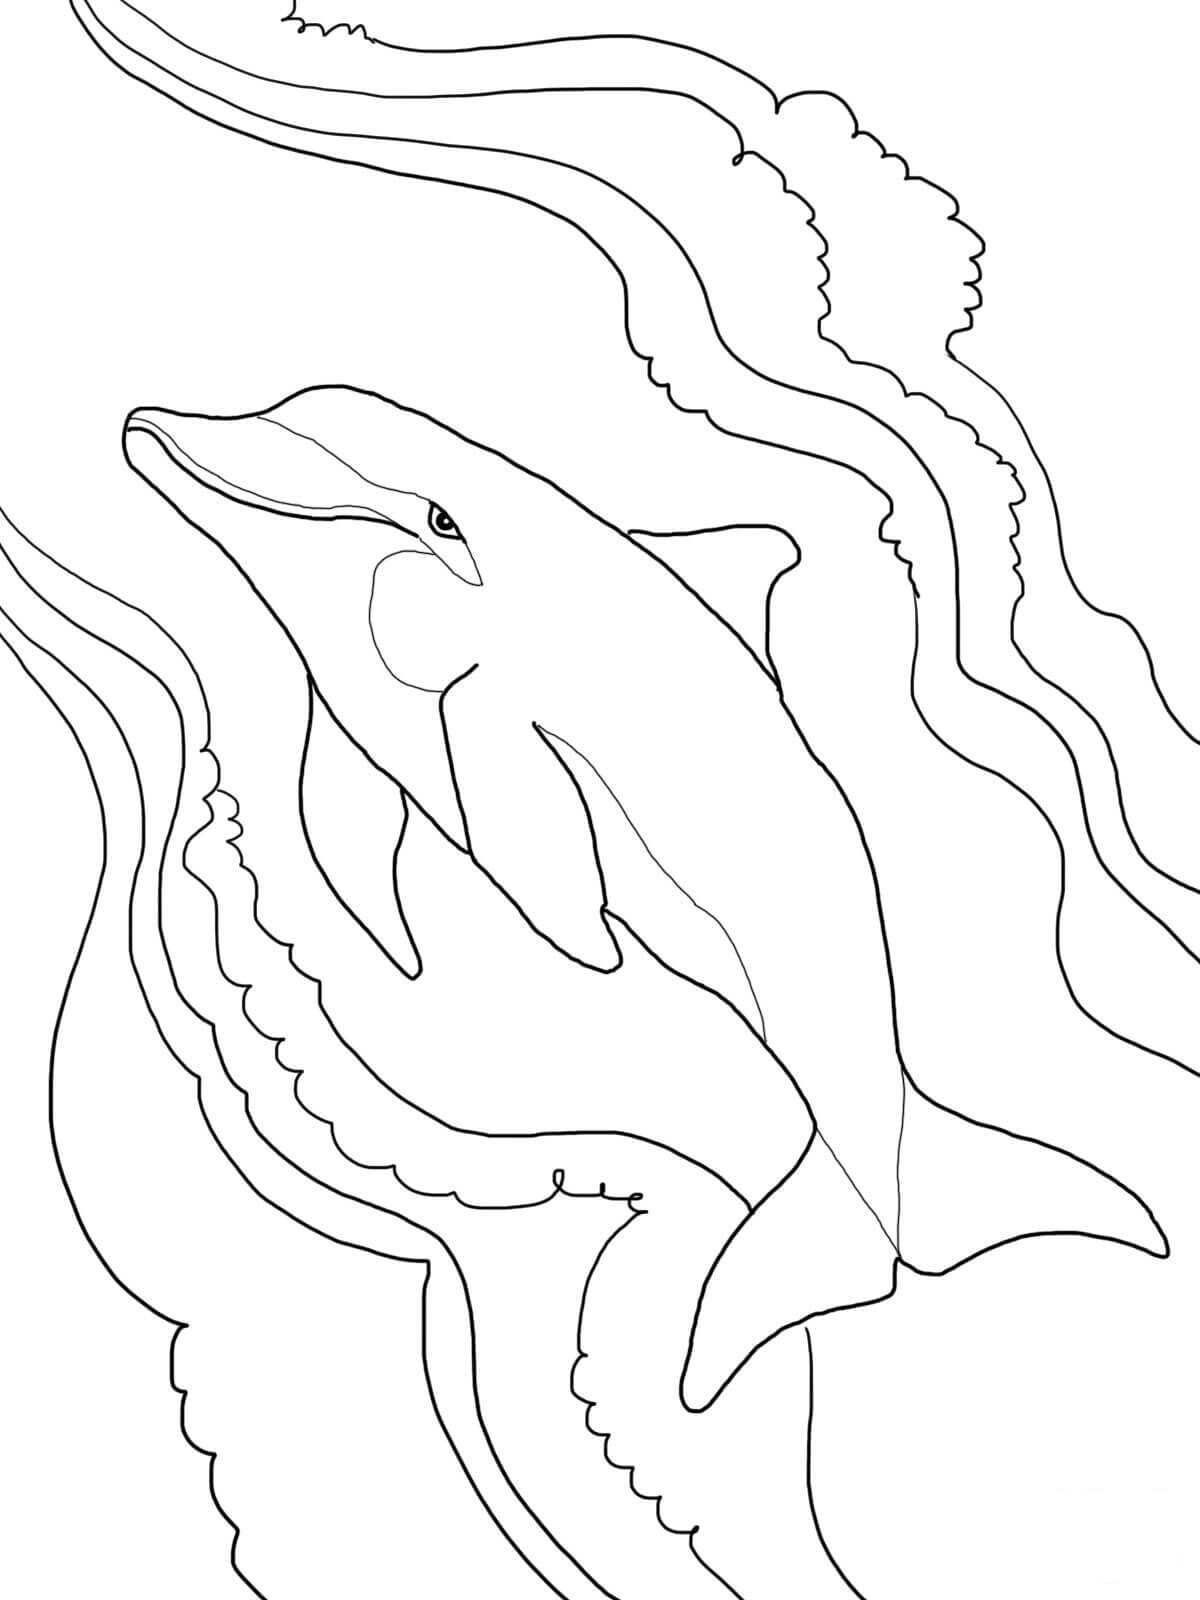 Dolphin swims along the water Coloring Page